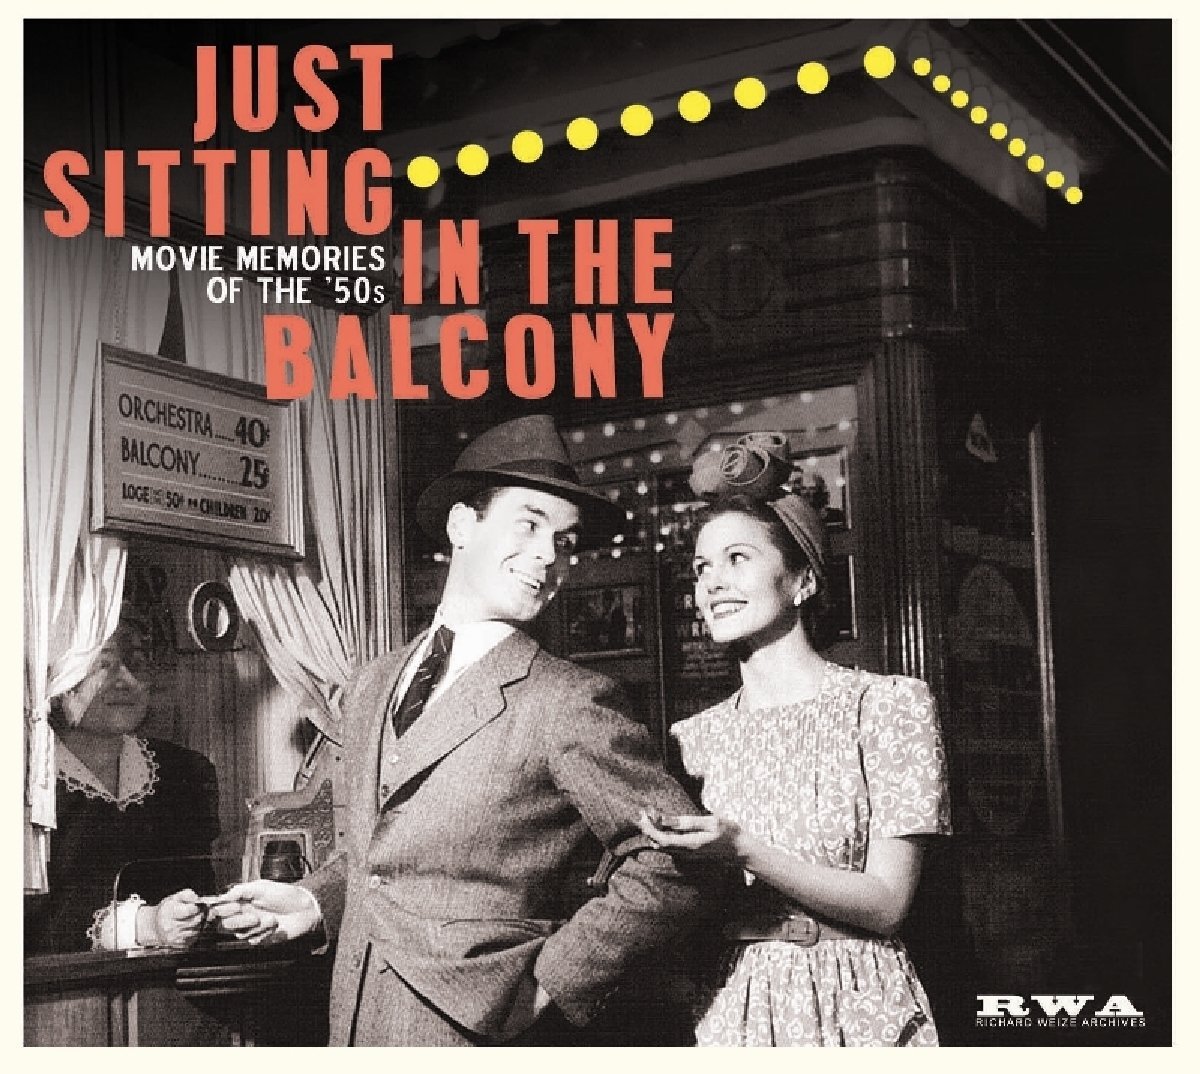 Just Sitting In The Balcony - Movie Memories Of The 50s   